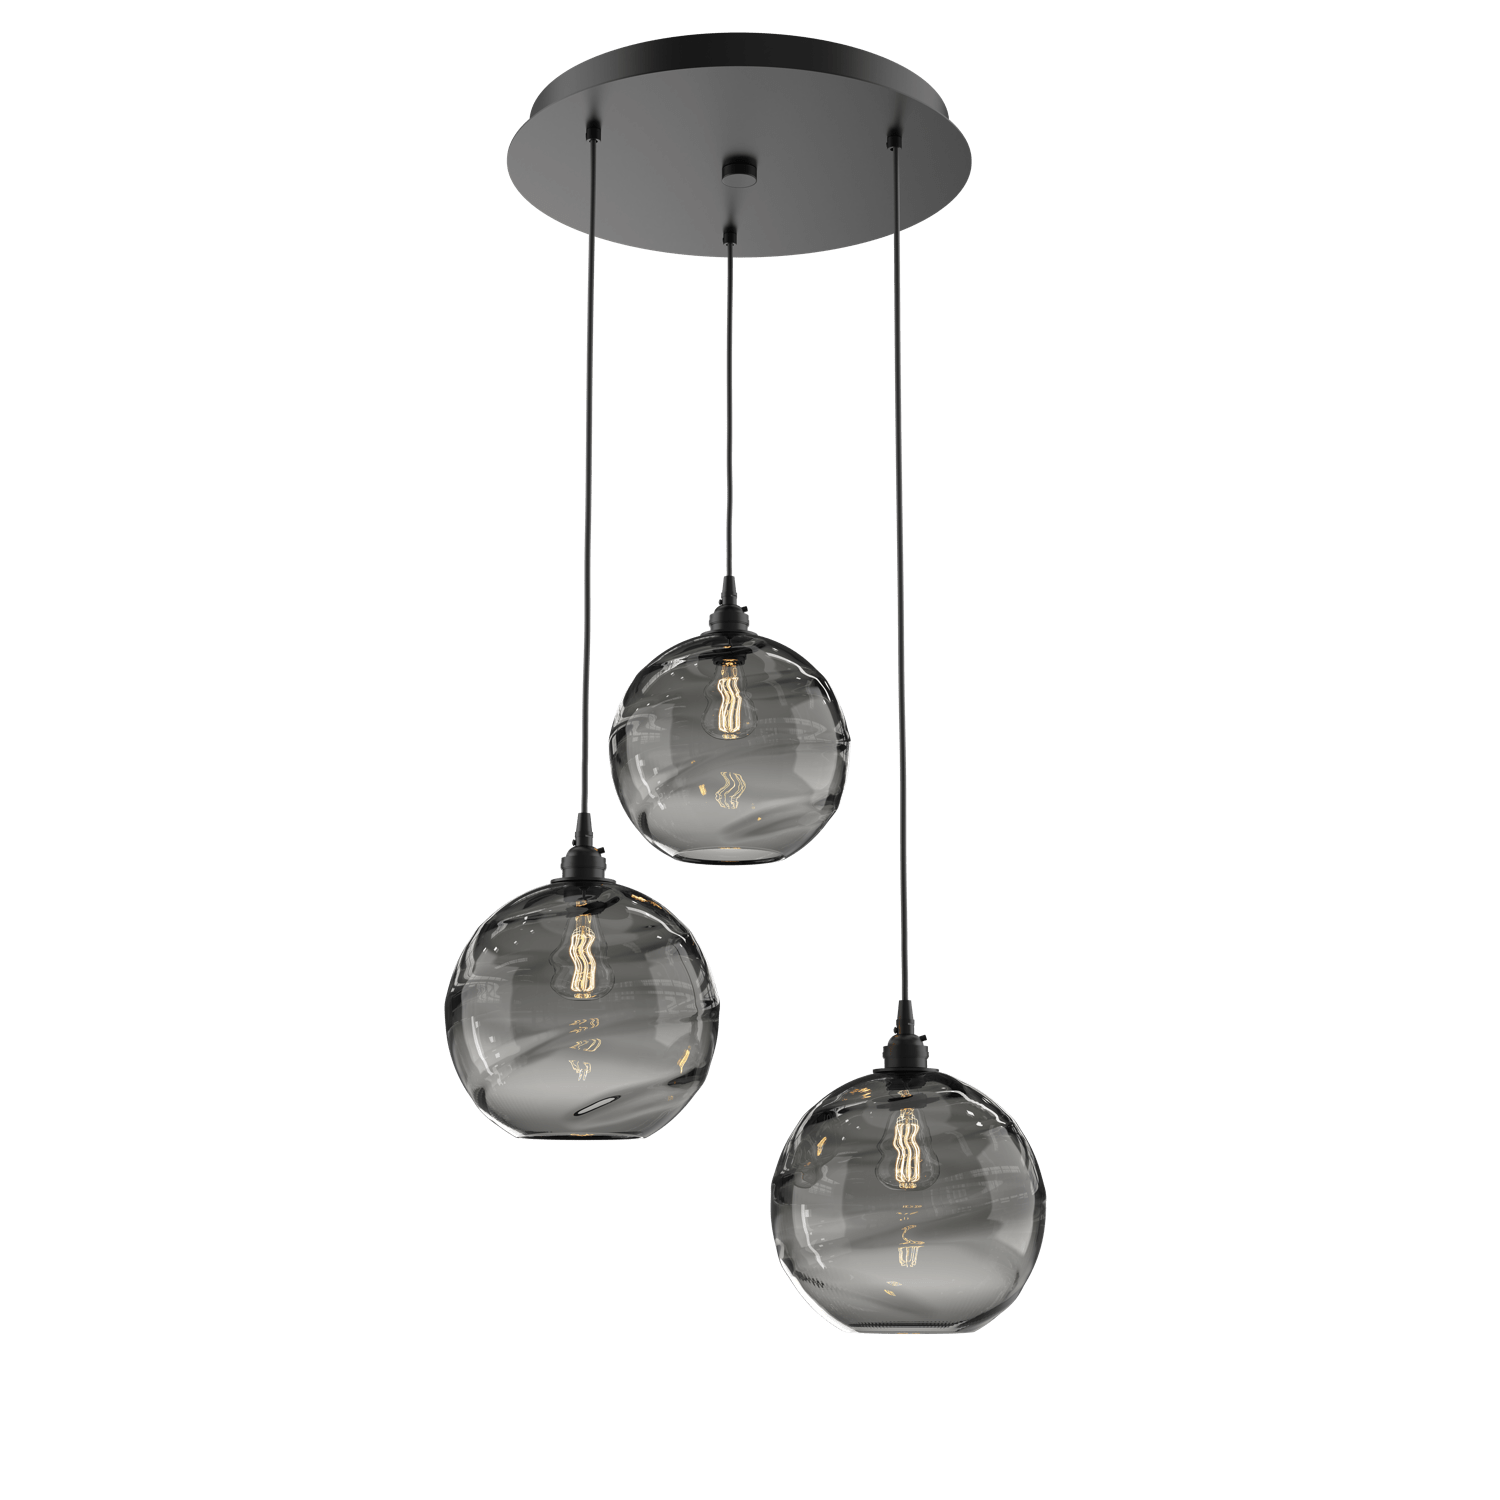 CHB0047-03-MB-OS-Hammerton-Studio-Optic-Blown-Glass-Terra-3-light-round-pendant-chandelier-with-matte-black-finish-and-optic-smoke-blown-glass-shades-and-incandescent-lamping